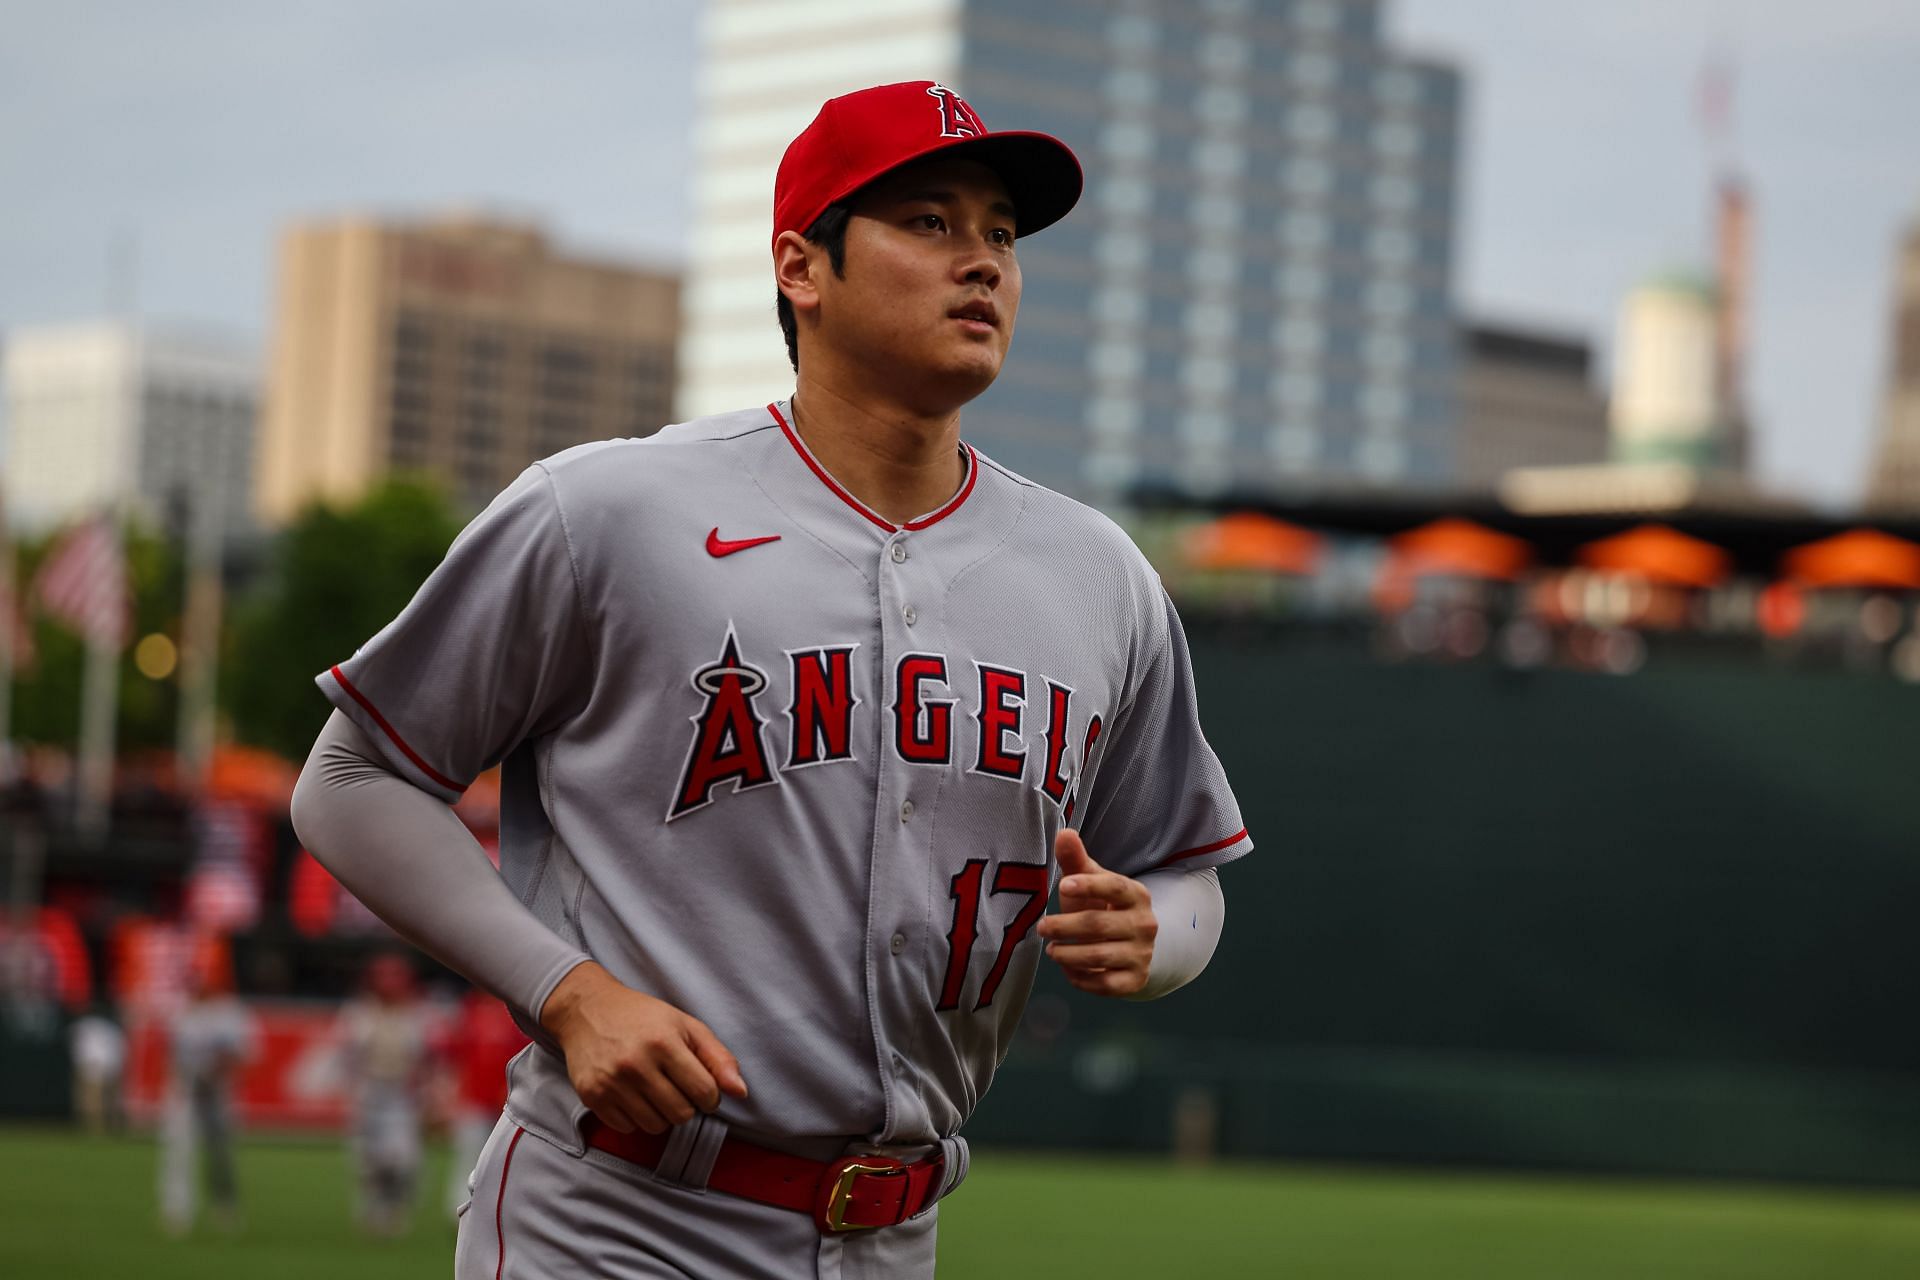 Shohei Ohtani is currently leading the race for the DH spot on the AL All-Star team.